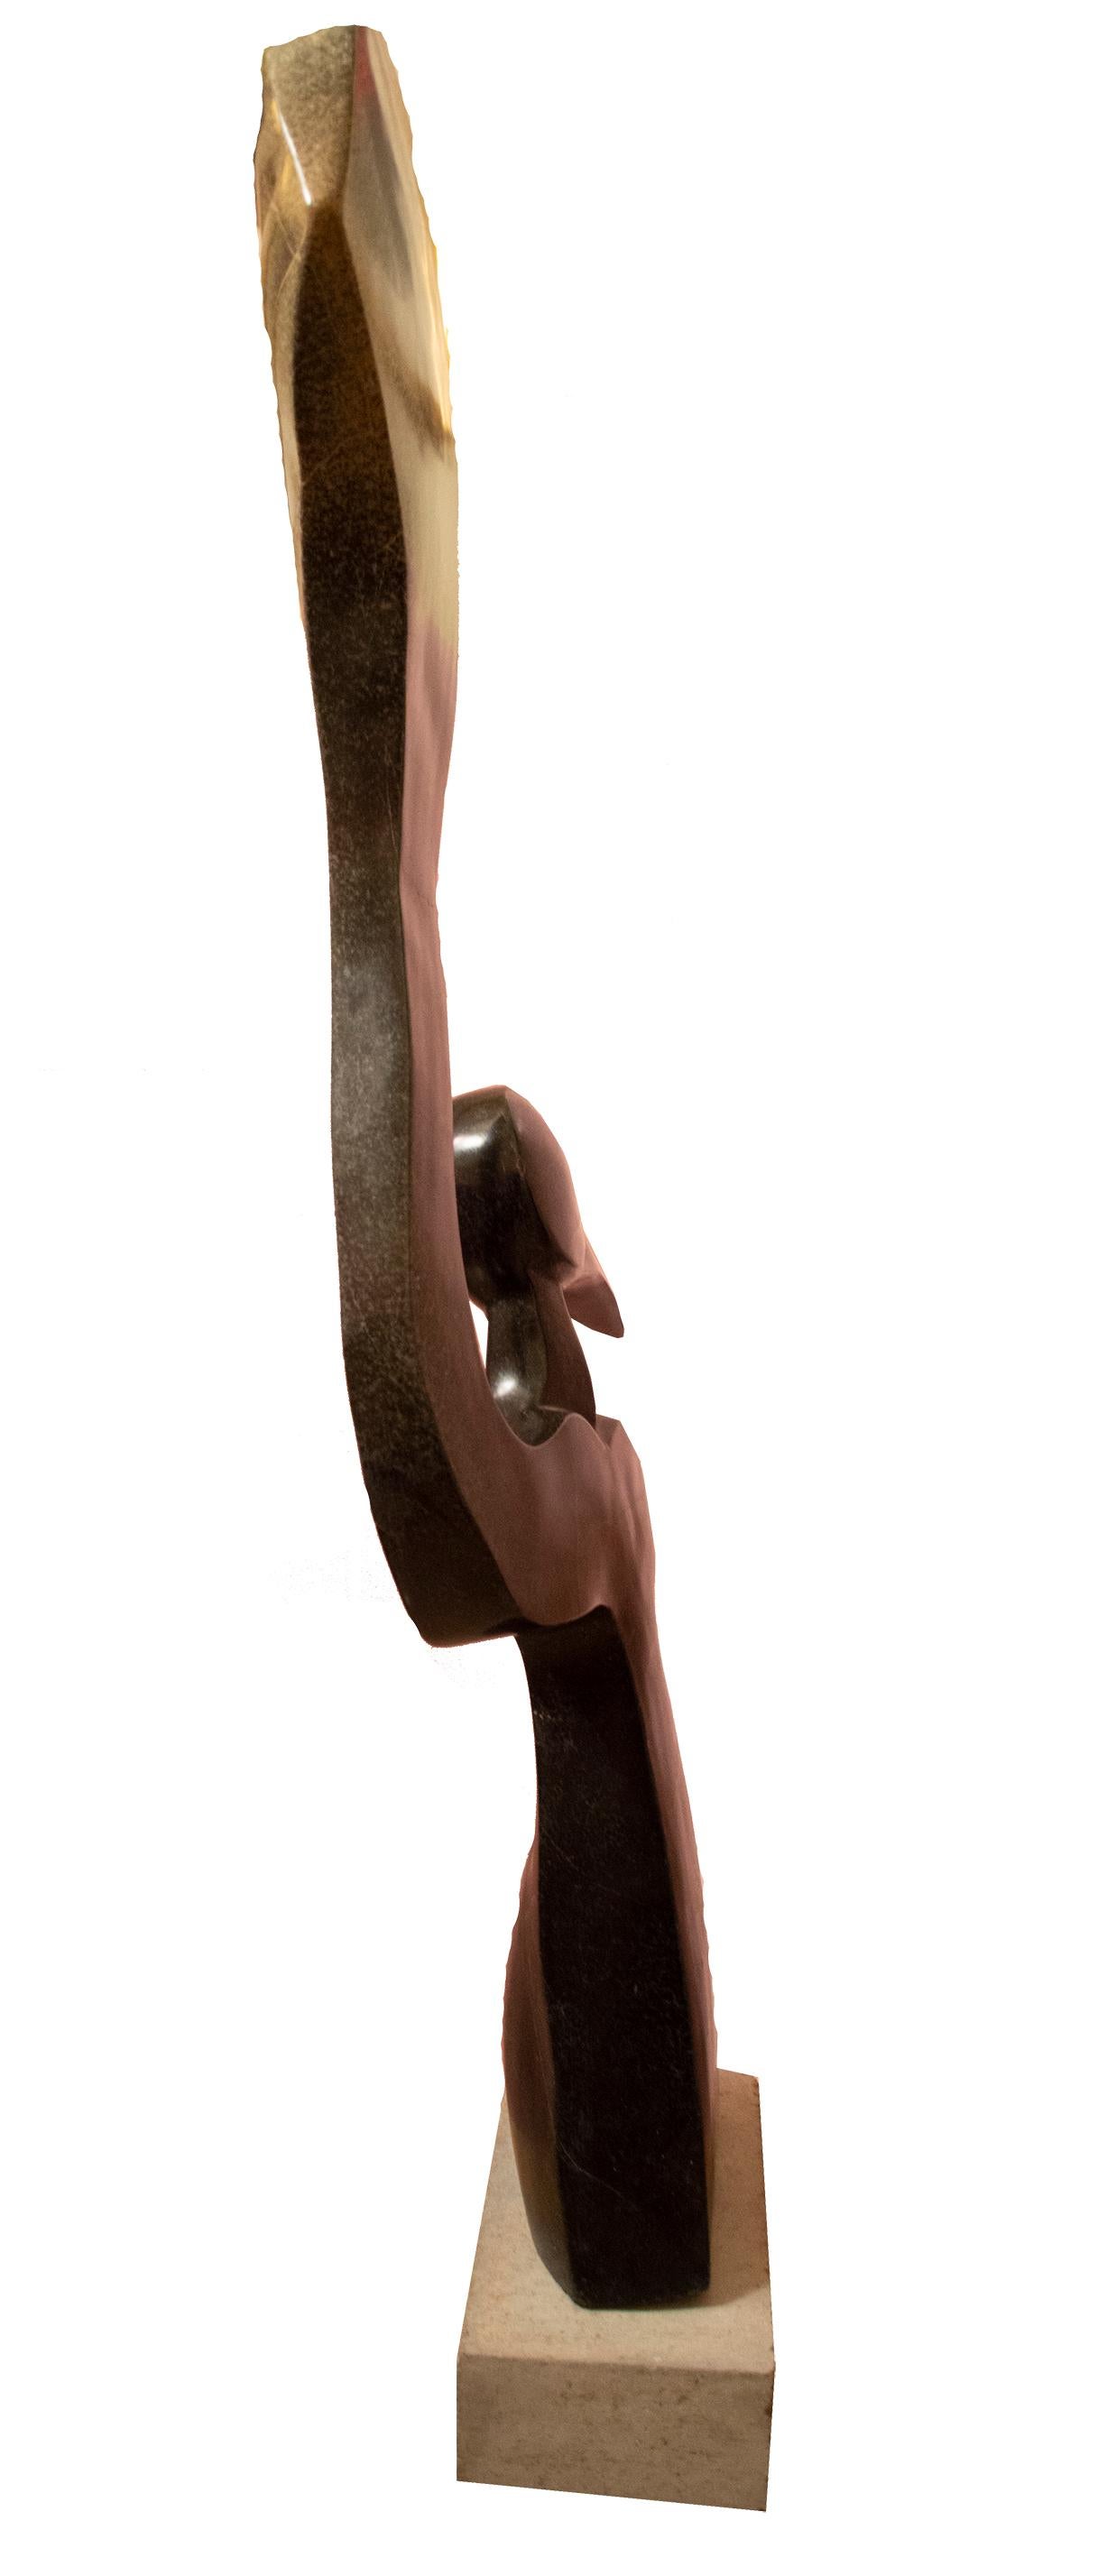 'Hope' original springstone sculpture signed by Zimbabwean artist Dudzai Mushawepwere. The sculpture uses abstraction in the human figure to capture an abstract state of mind: the sculpture presents the form of a woman merged with the form of a